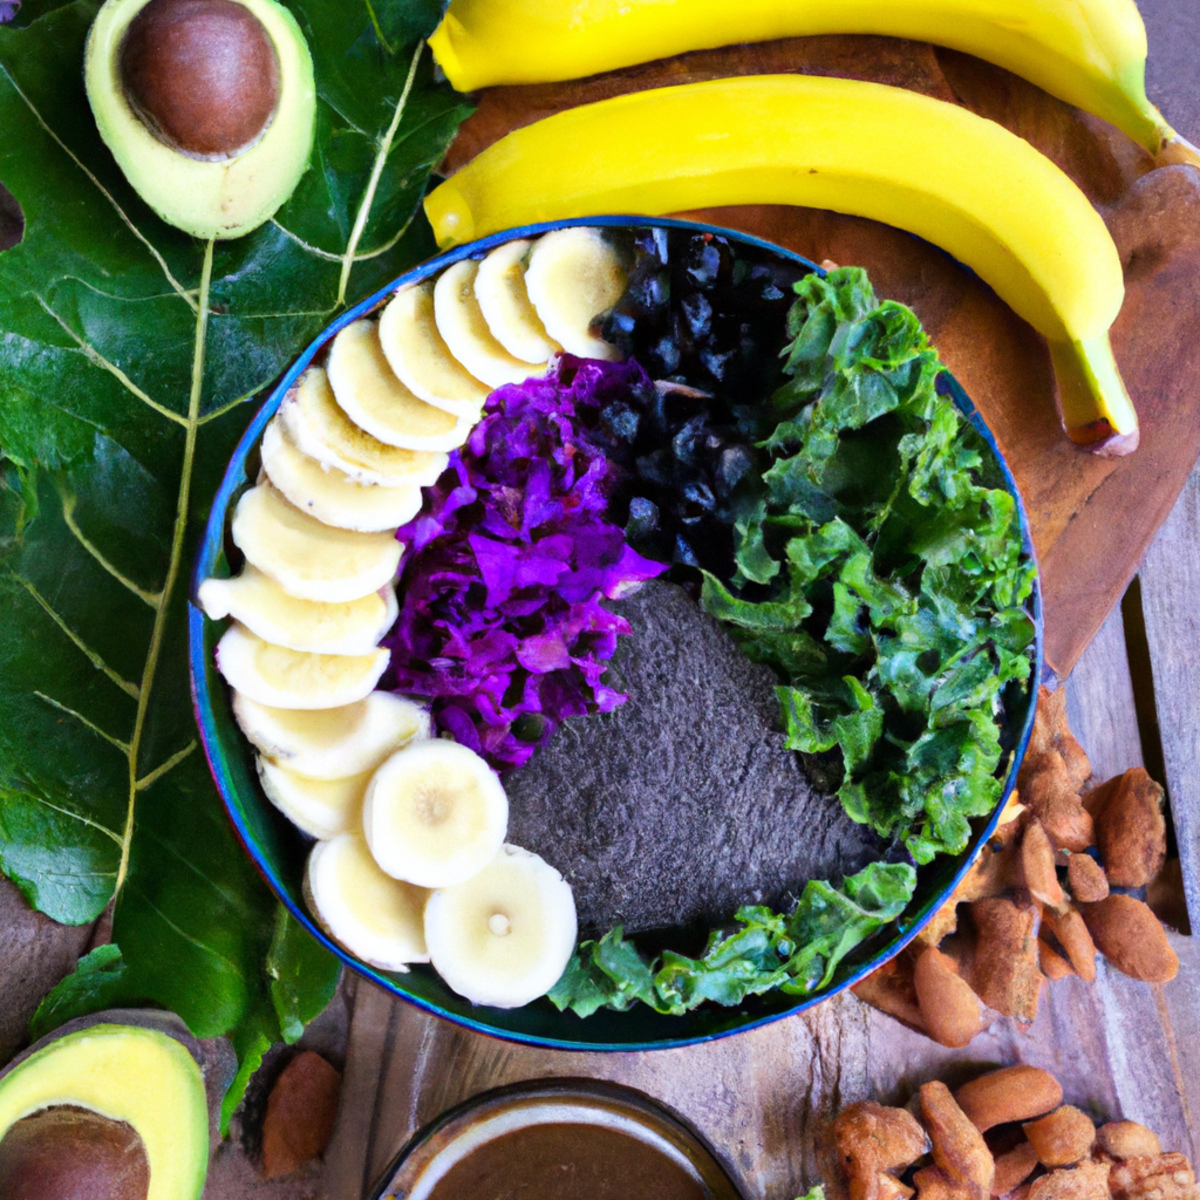 The photo features a wooden table with an assortment of colorful superfoods arranged in an aesthetically pleasing manner. A bright yellow banana sits next to a deep purple bowl filled with antioxidant-rich blueberries. A handful of nutrient-dense almonds are scattered around a small dish of creamy avocado slices. A vibrant green kale leaf peeks out from behind a juicy red apple. The overall composition of the photo exudes a sense of health and vitality, inviting the viewer to indulge in these stress-relieving superfoods.